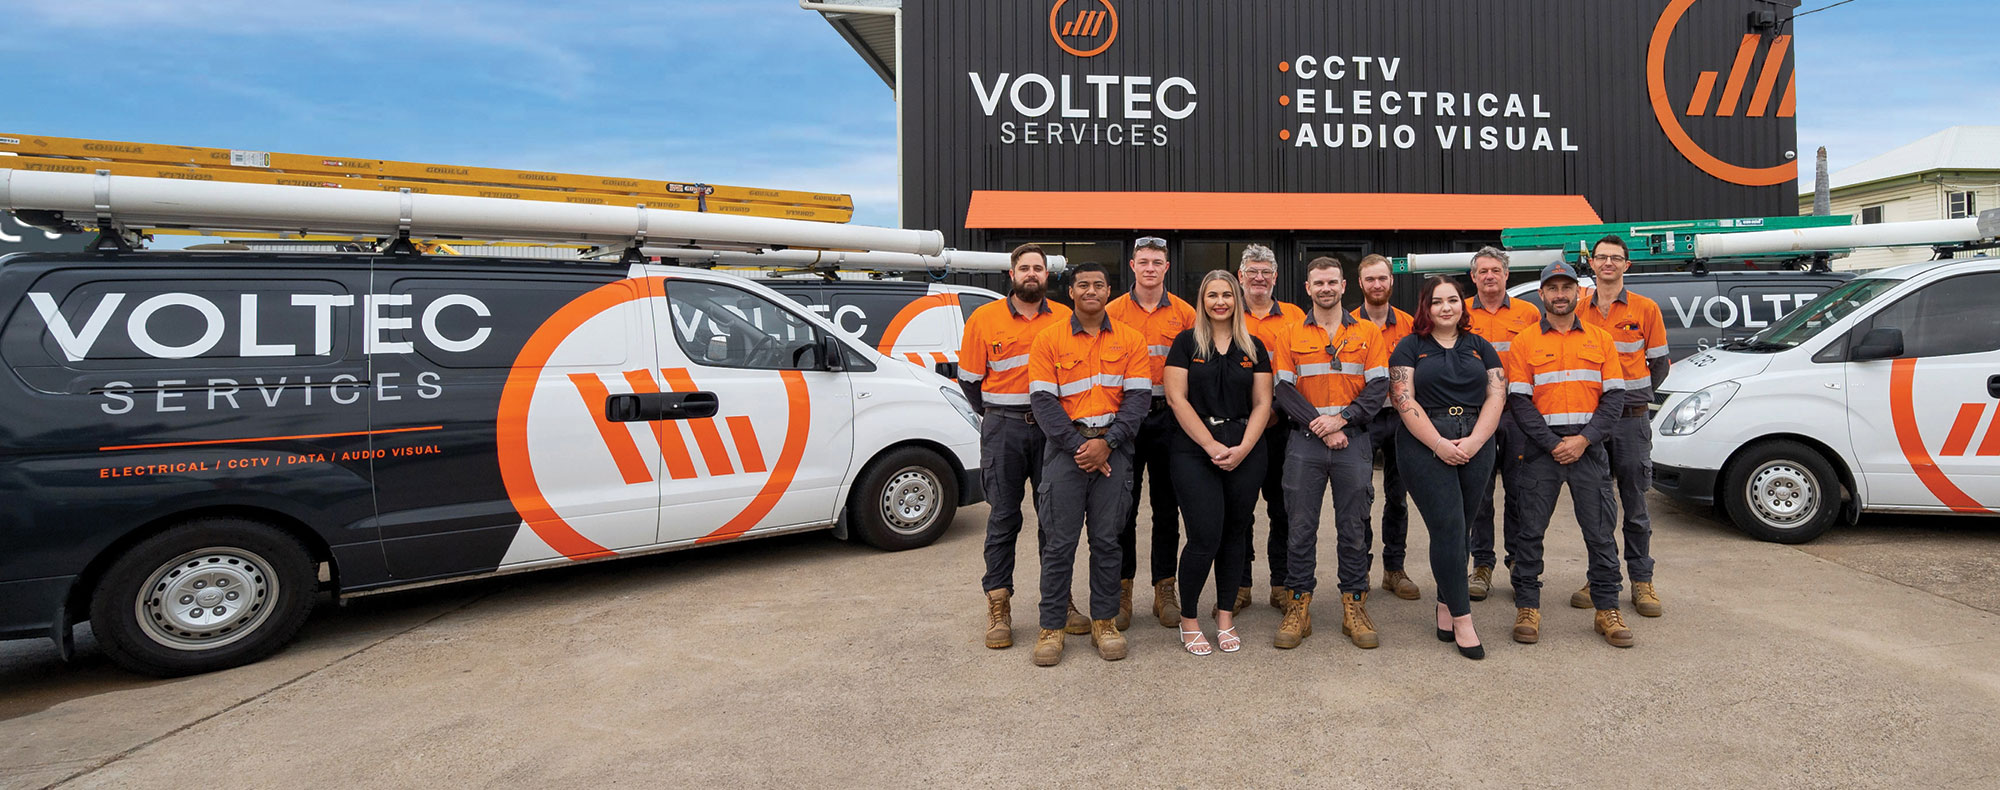 Voltec Services is your trusted full-service commercial electrician in Townsville